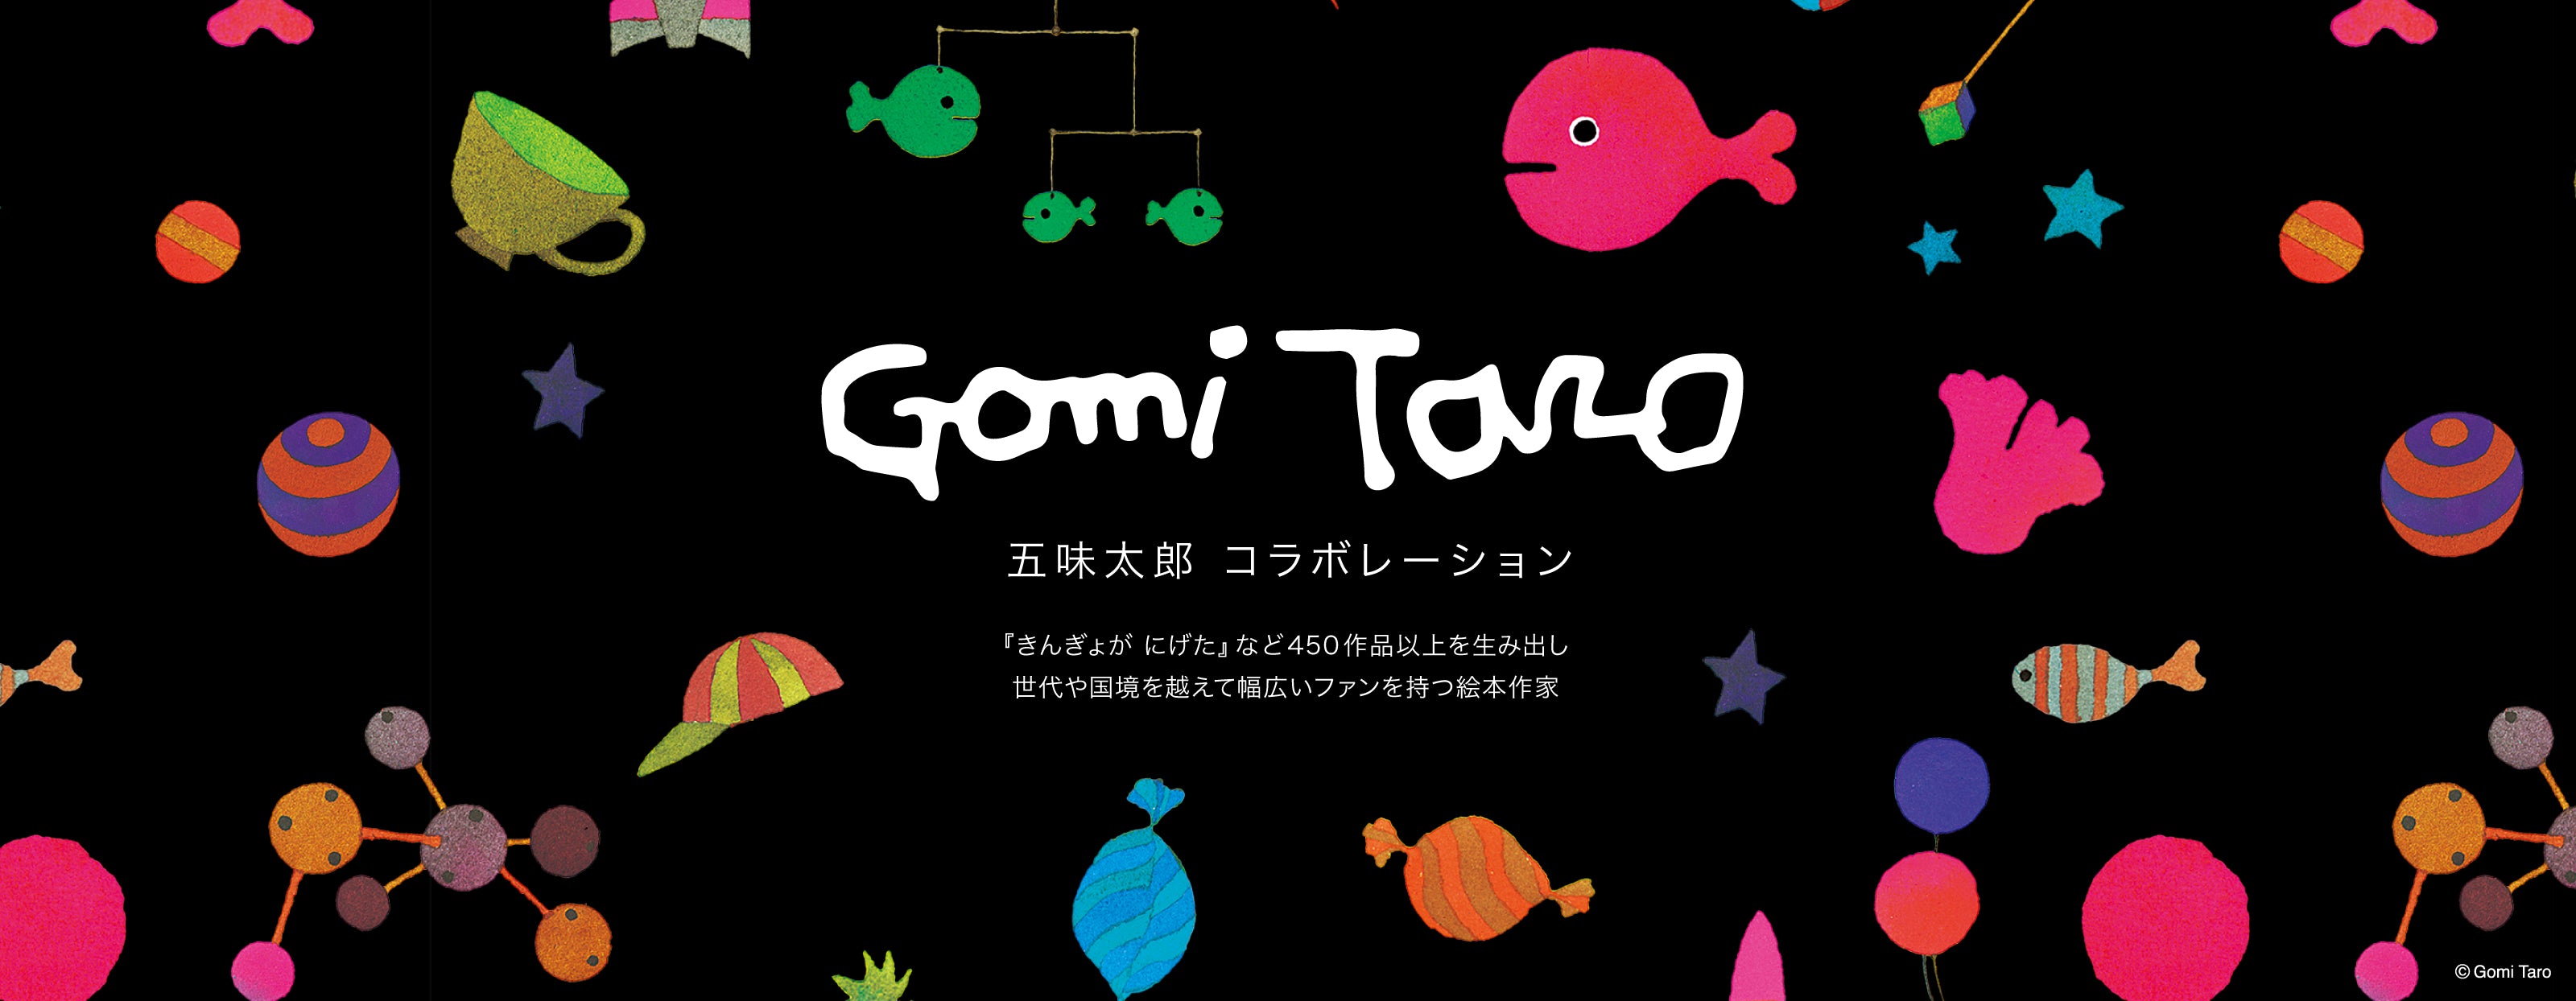 By now generations of children and adults both in Japan and abroad have enjoyed the picture books of Taro Gomi. We have picked our favorites from his library of work - about 400 books - to create this collection of fun and colorful Taro Gomi themed clothing! [ssorder:-20221106]